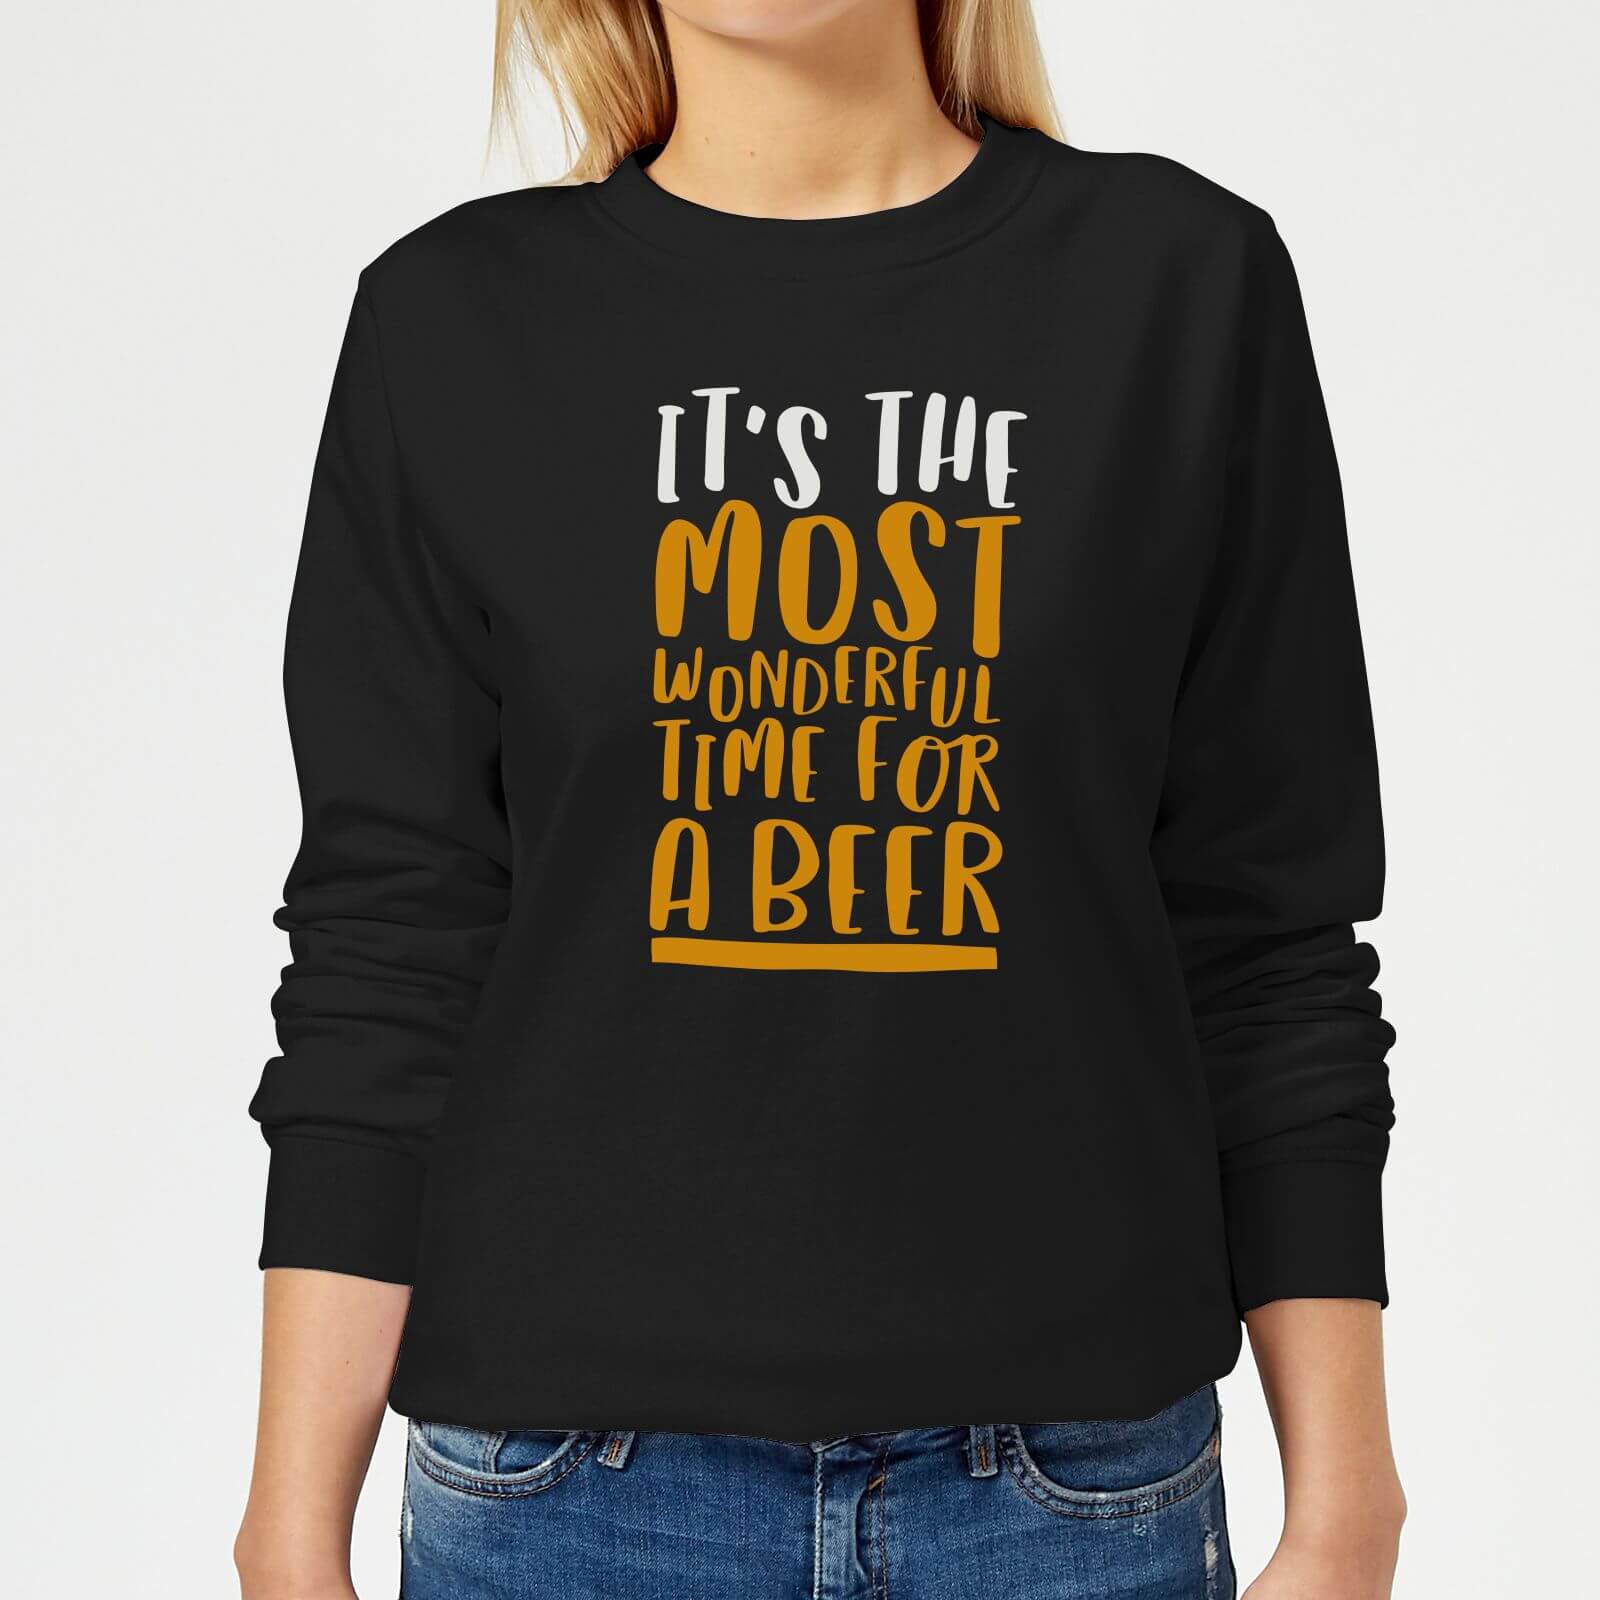 It's The Most Wonderful Time for A Beer Women's Christmas Sweatshirt - Black - XS - Black